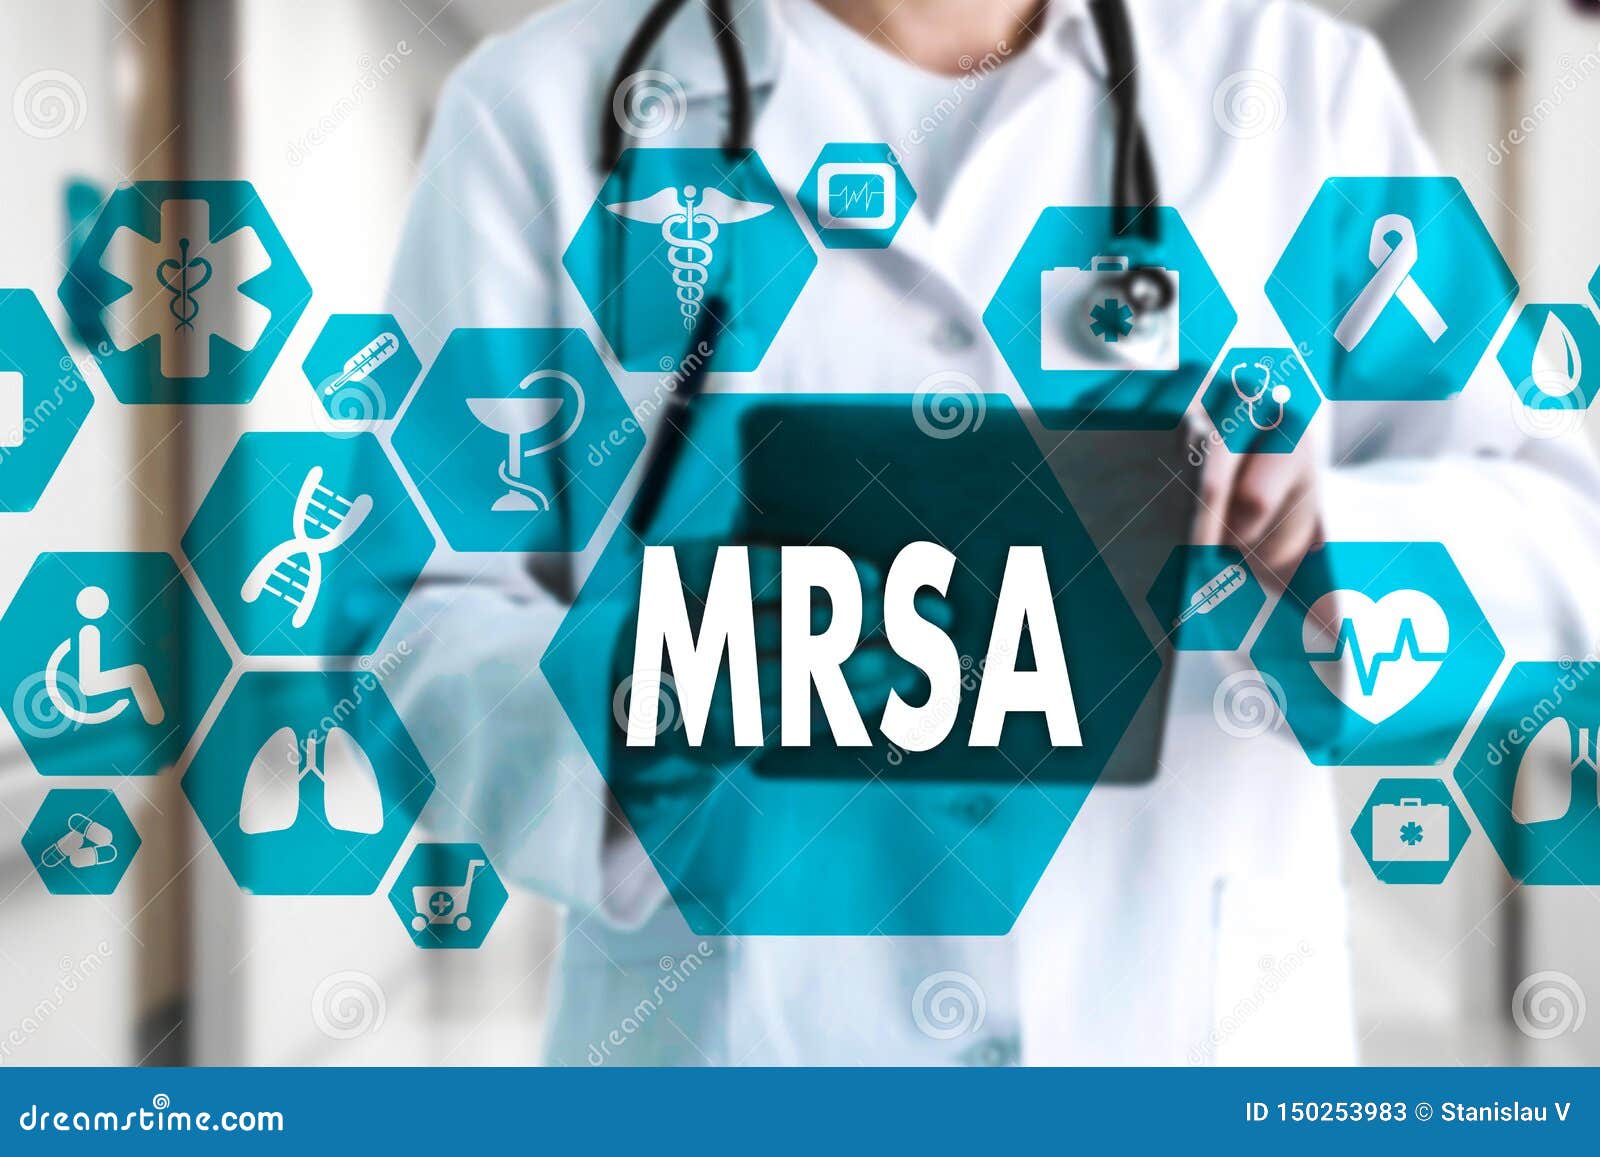 medical doctor with stethoscope and word mrsa ,methicillin-resistant staphylococcus aureus in medical network connection on the